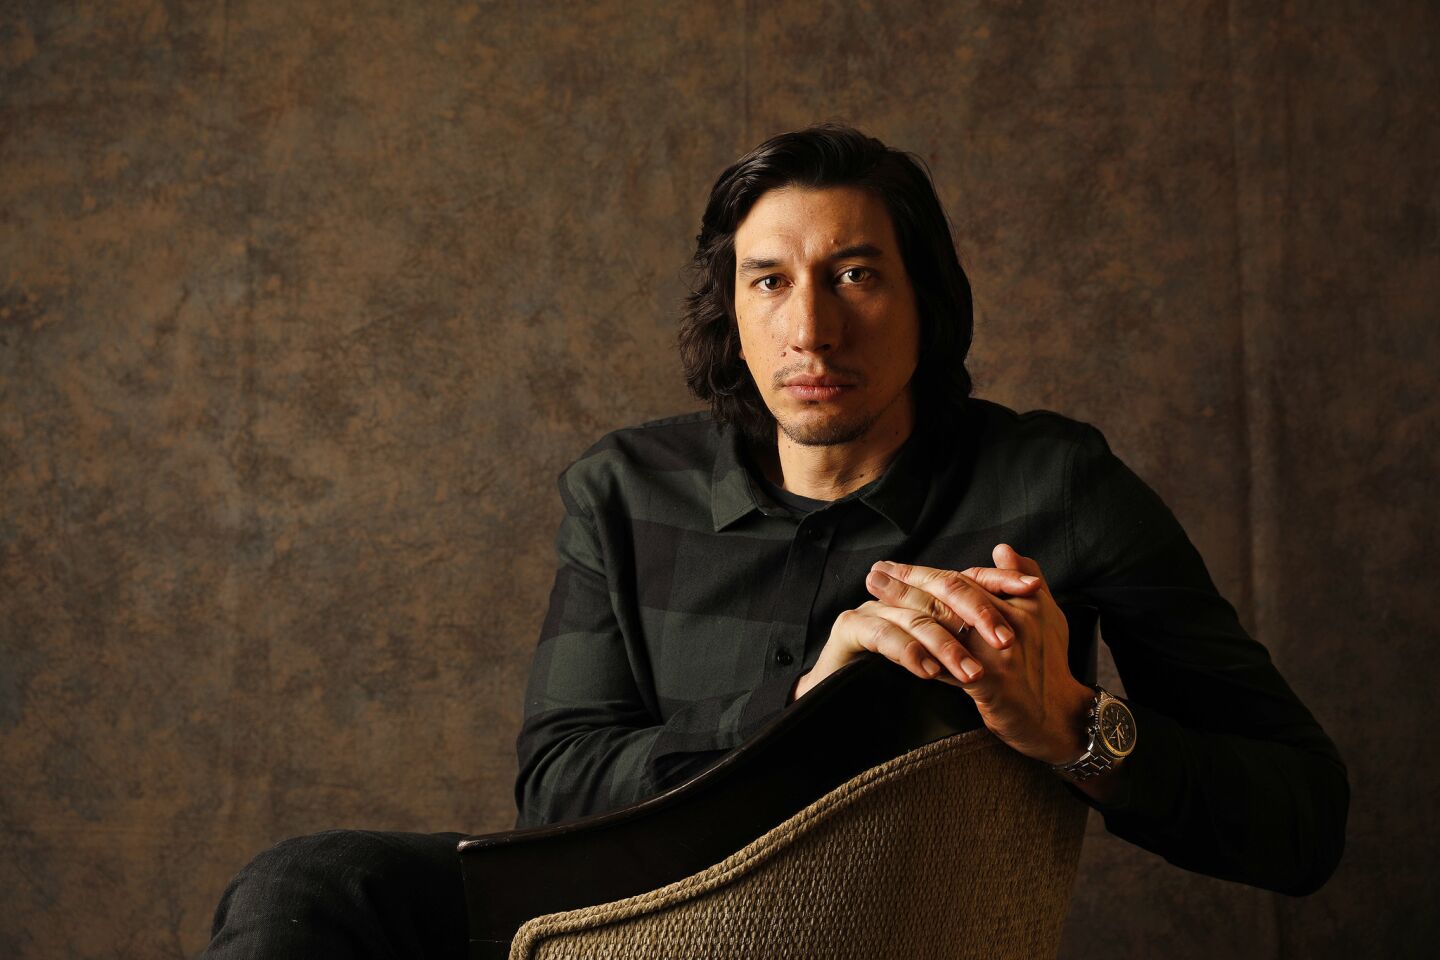 A three-time Emmy nominee whose résumé includes indie films as well as the “Star Wars” saga, Adam Driver collects his first Oscar nomination thanks to Spike Lee’s politically charged dramedy. Driver also earned his first SAG, BAFTA and Golden Globe nominations for the performance.